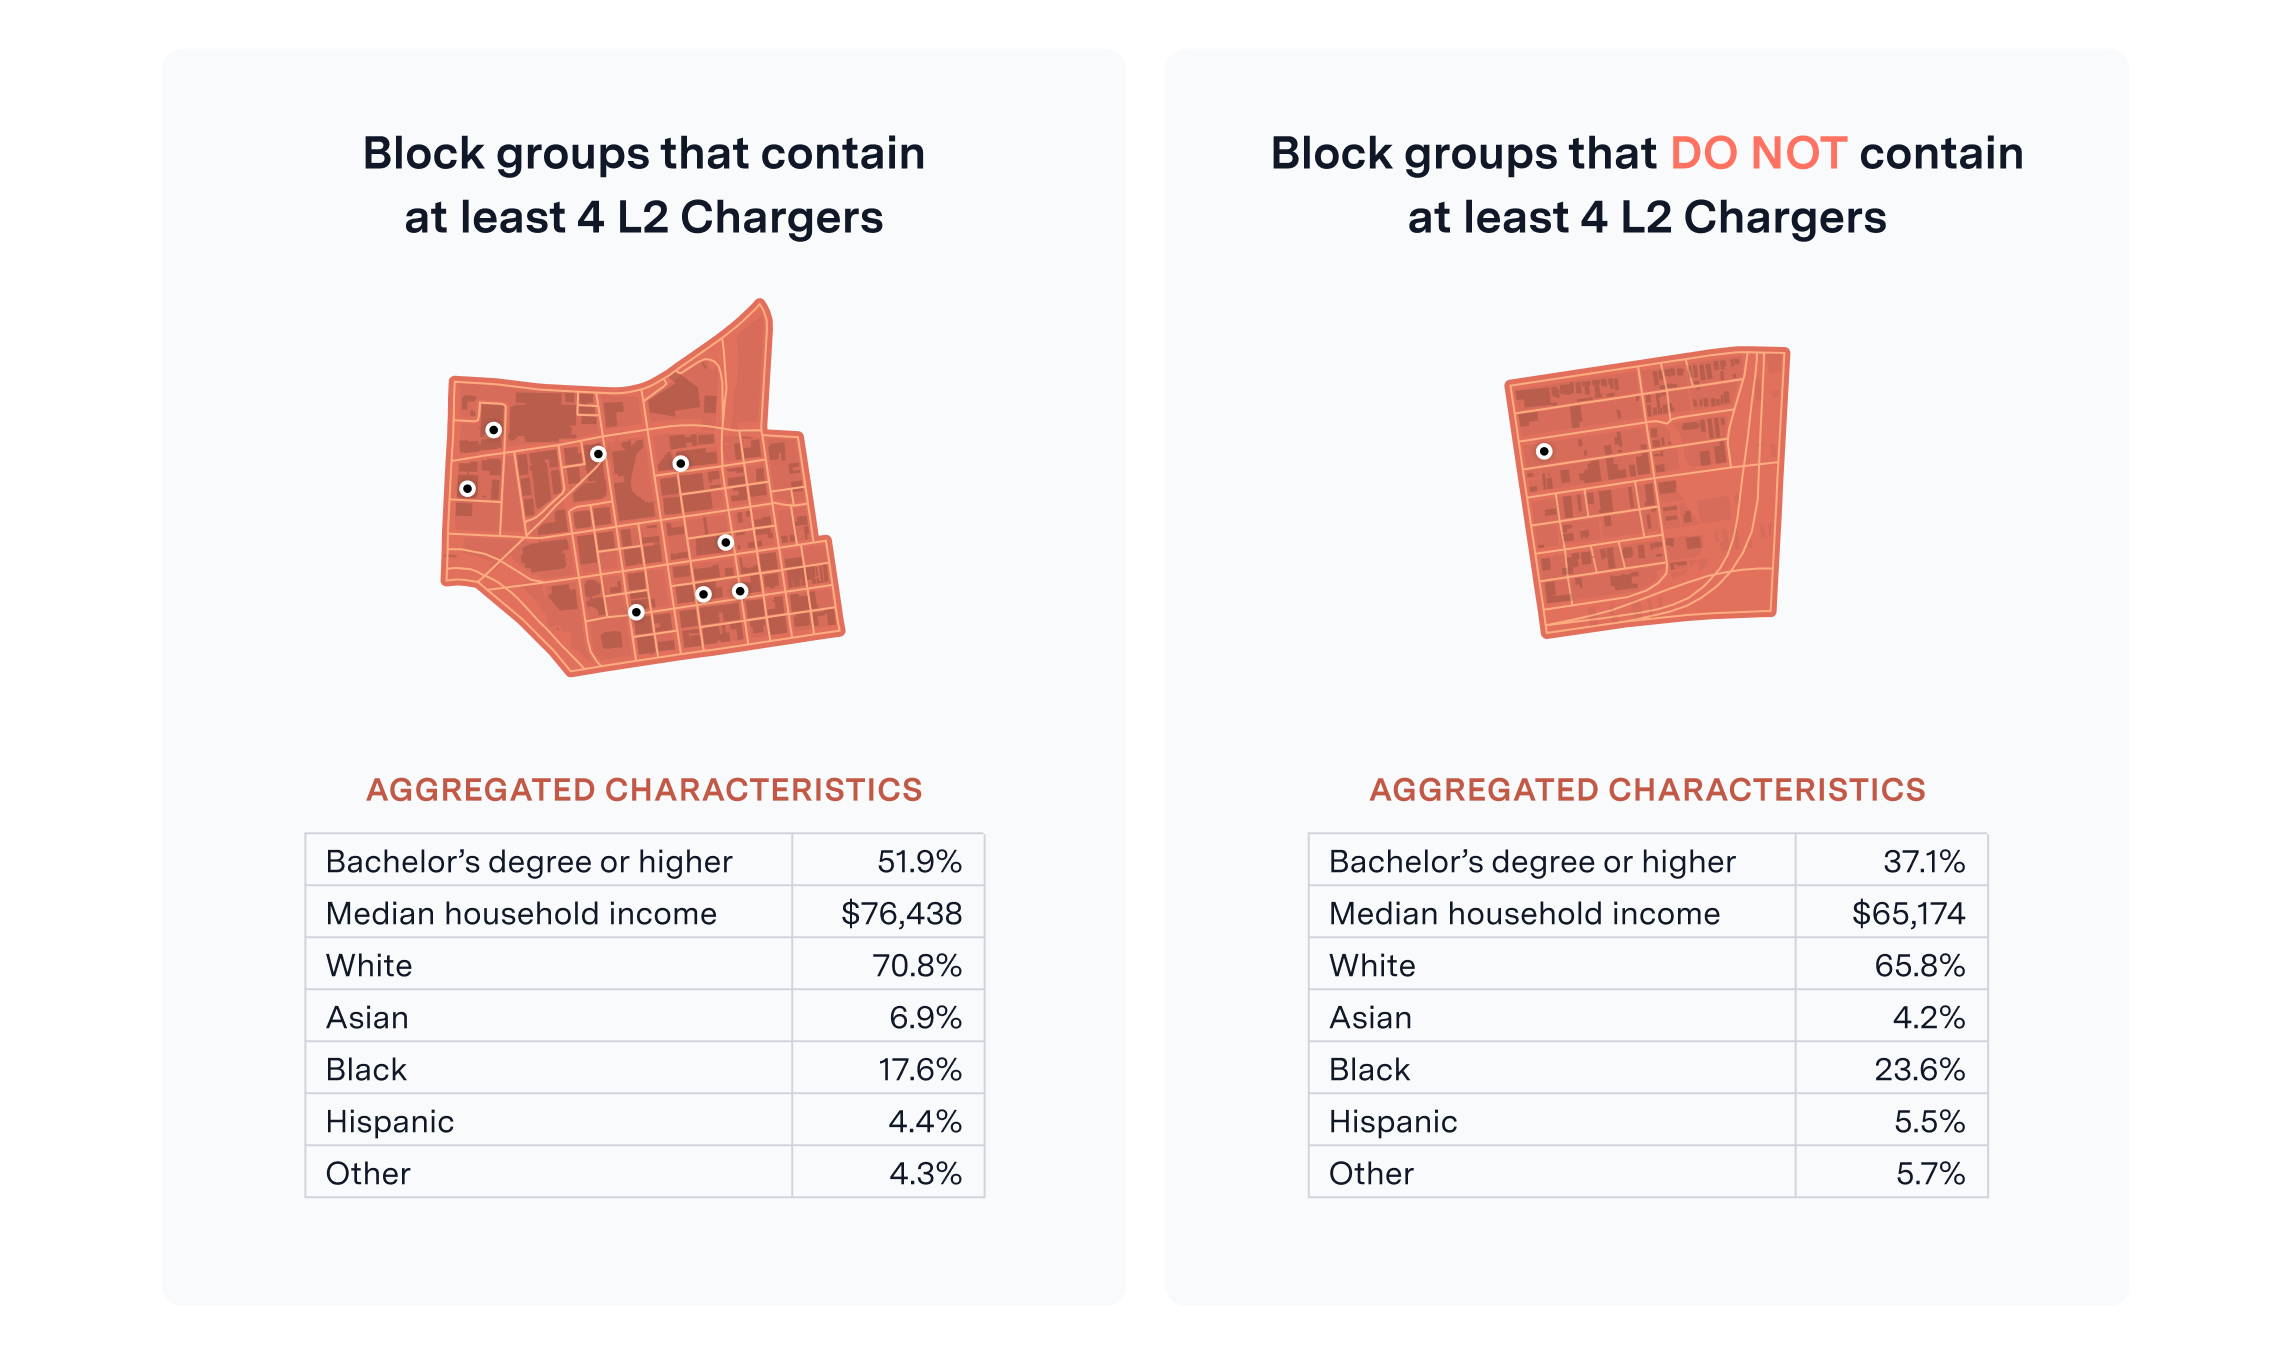 Characteristics of block groups with at least 4 EV chargers